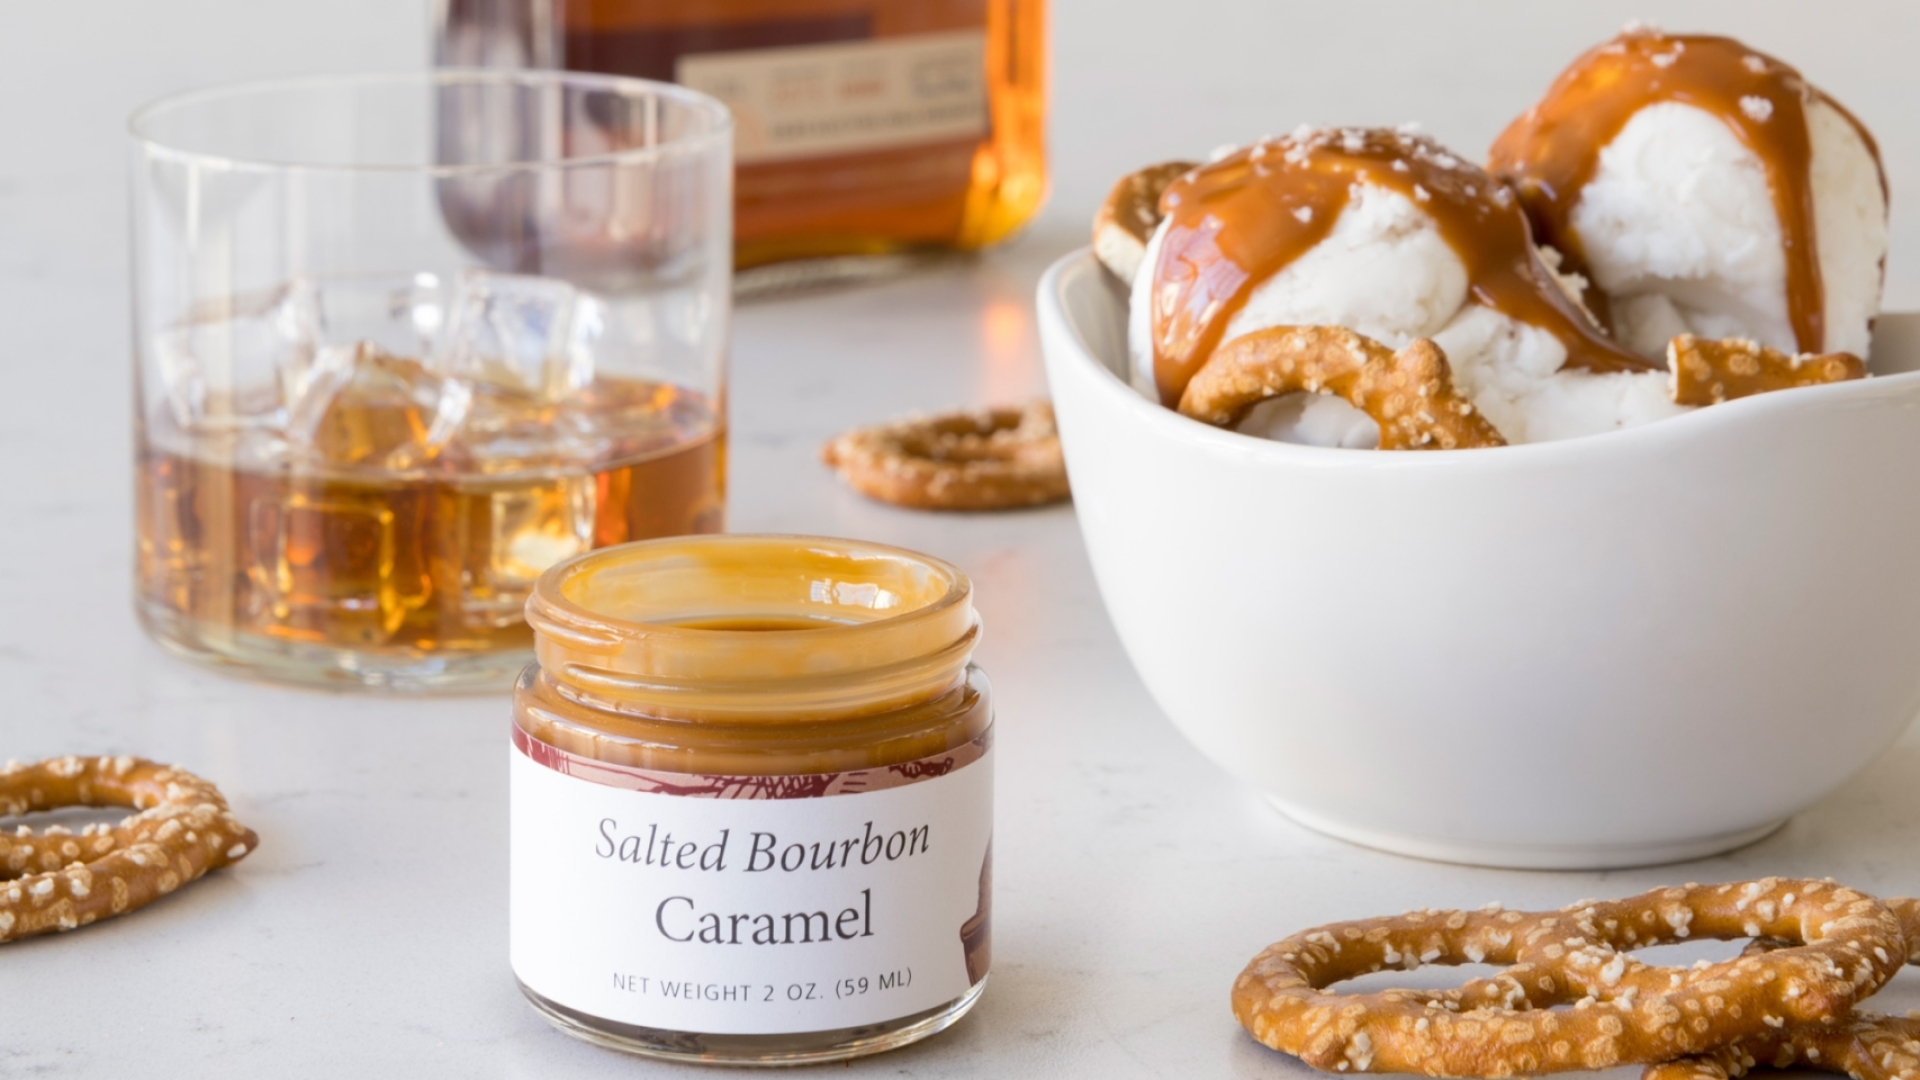 A bowl of pretzels and a bottle of whiskey paired with a Salted Bourbon Caramel Sundae.